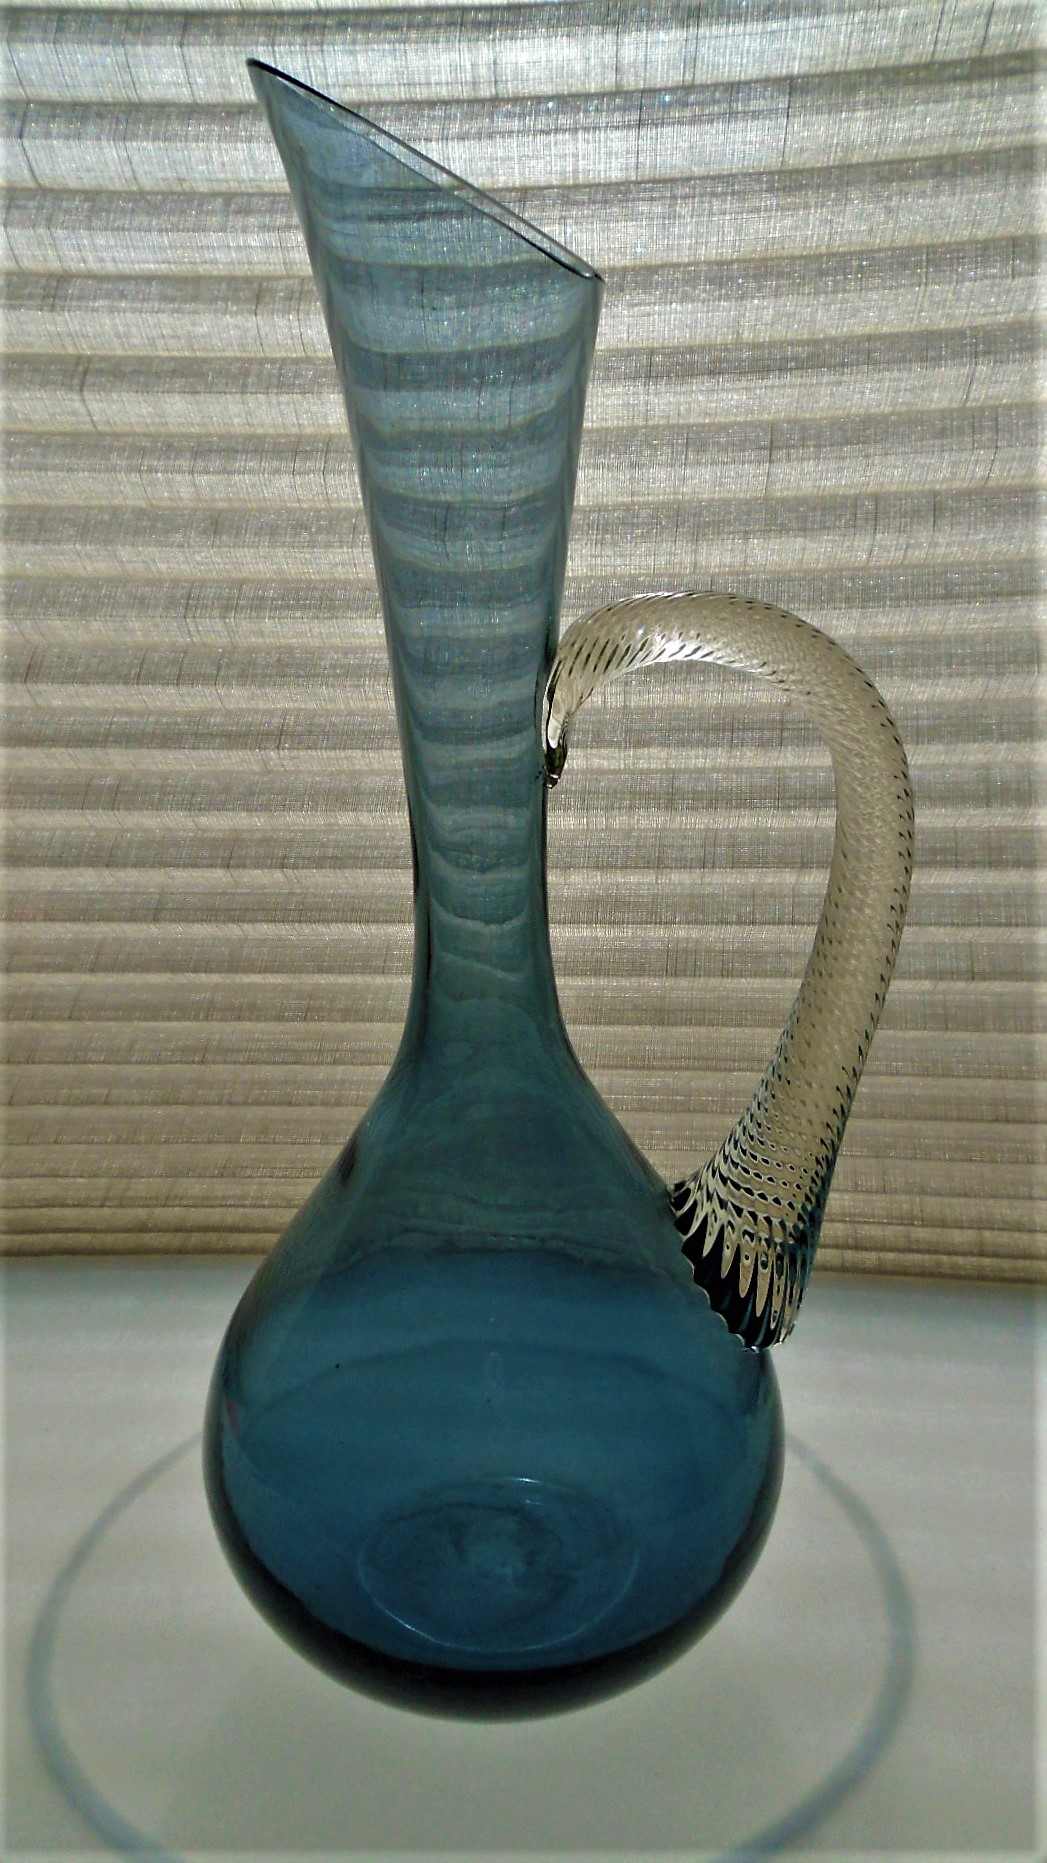 Beautifully elegant Mid Century Empoli Glass Water Pitcher in Indigo /Blue with twisted pattern clear glass handle